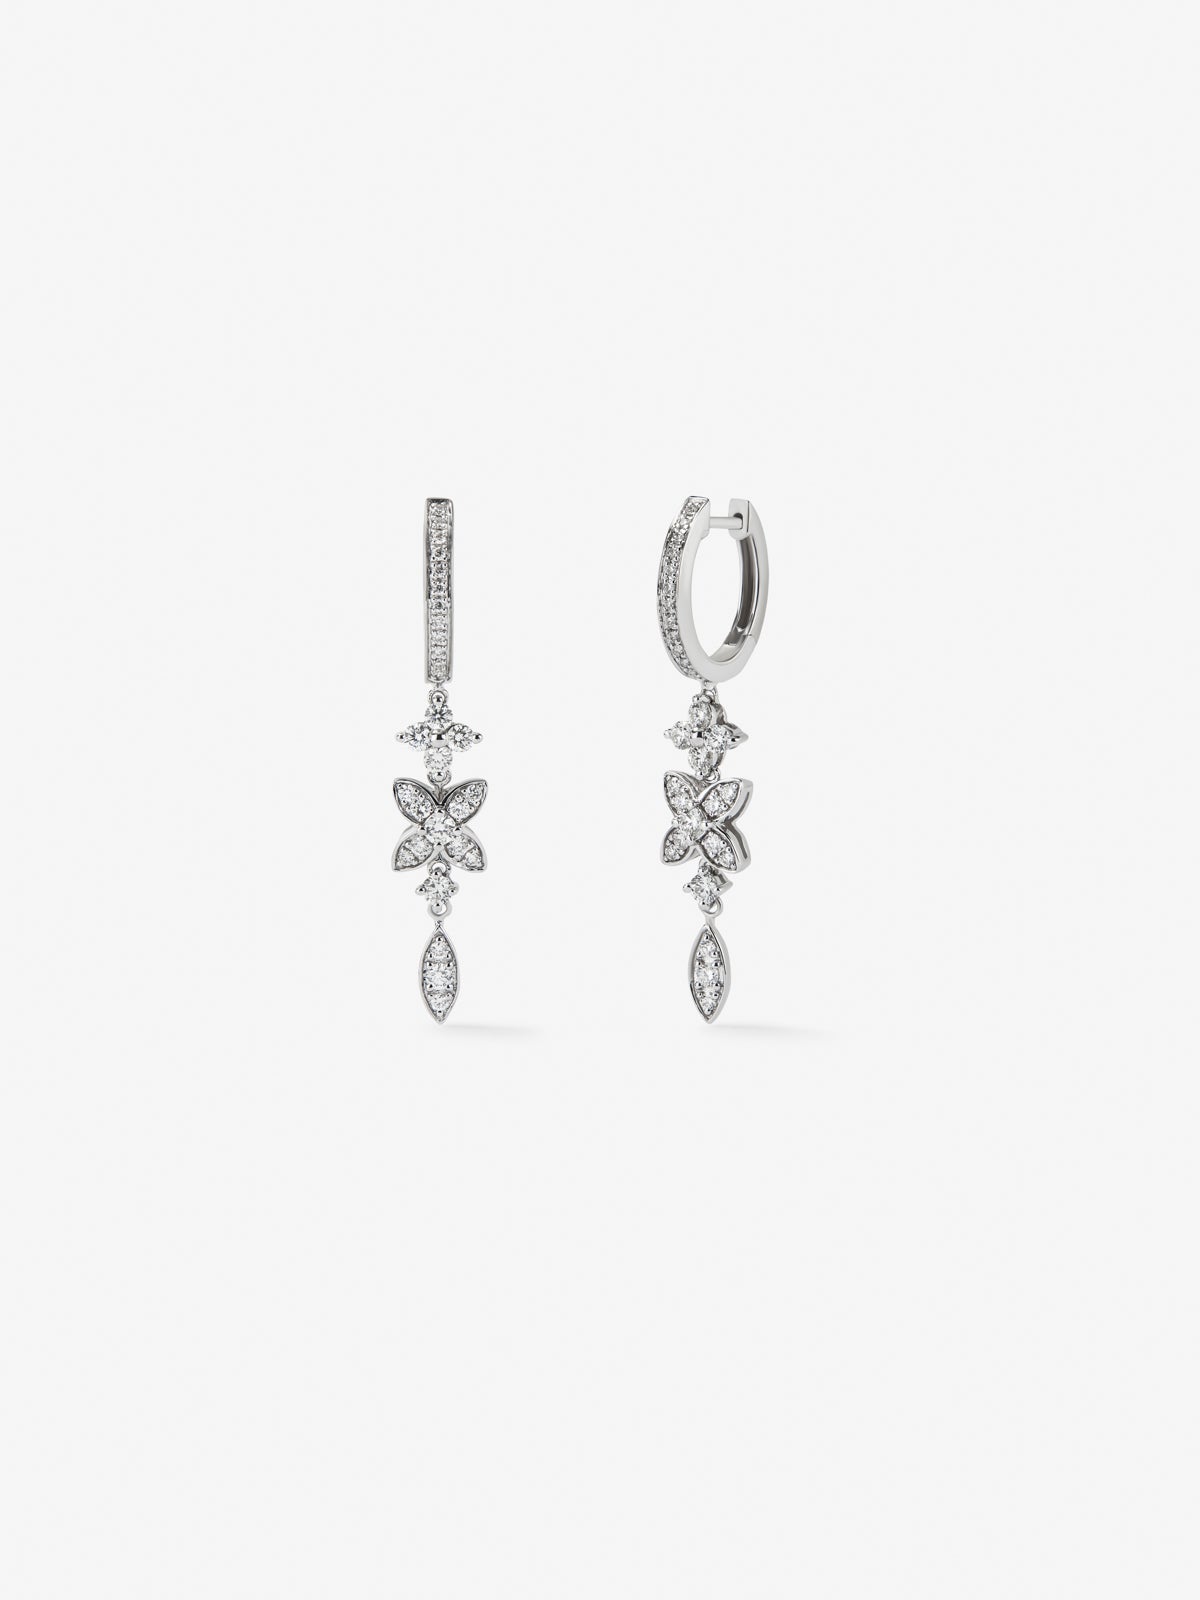 18K white gold earrings with 58 brilliant-cut diamonds with a total of 0.76 cts